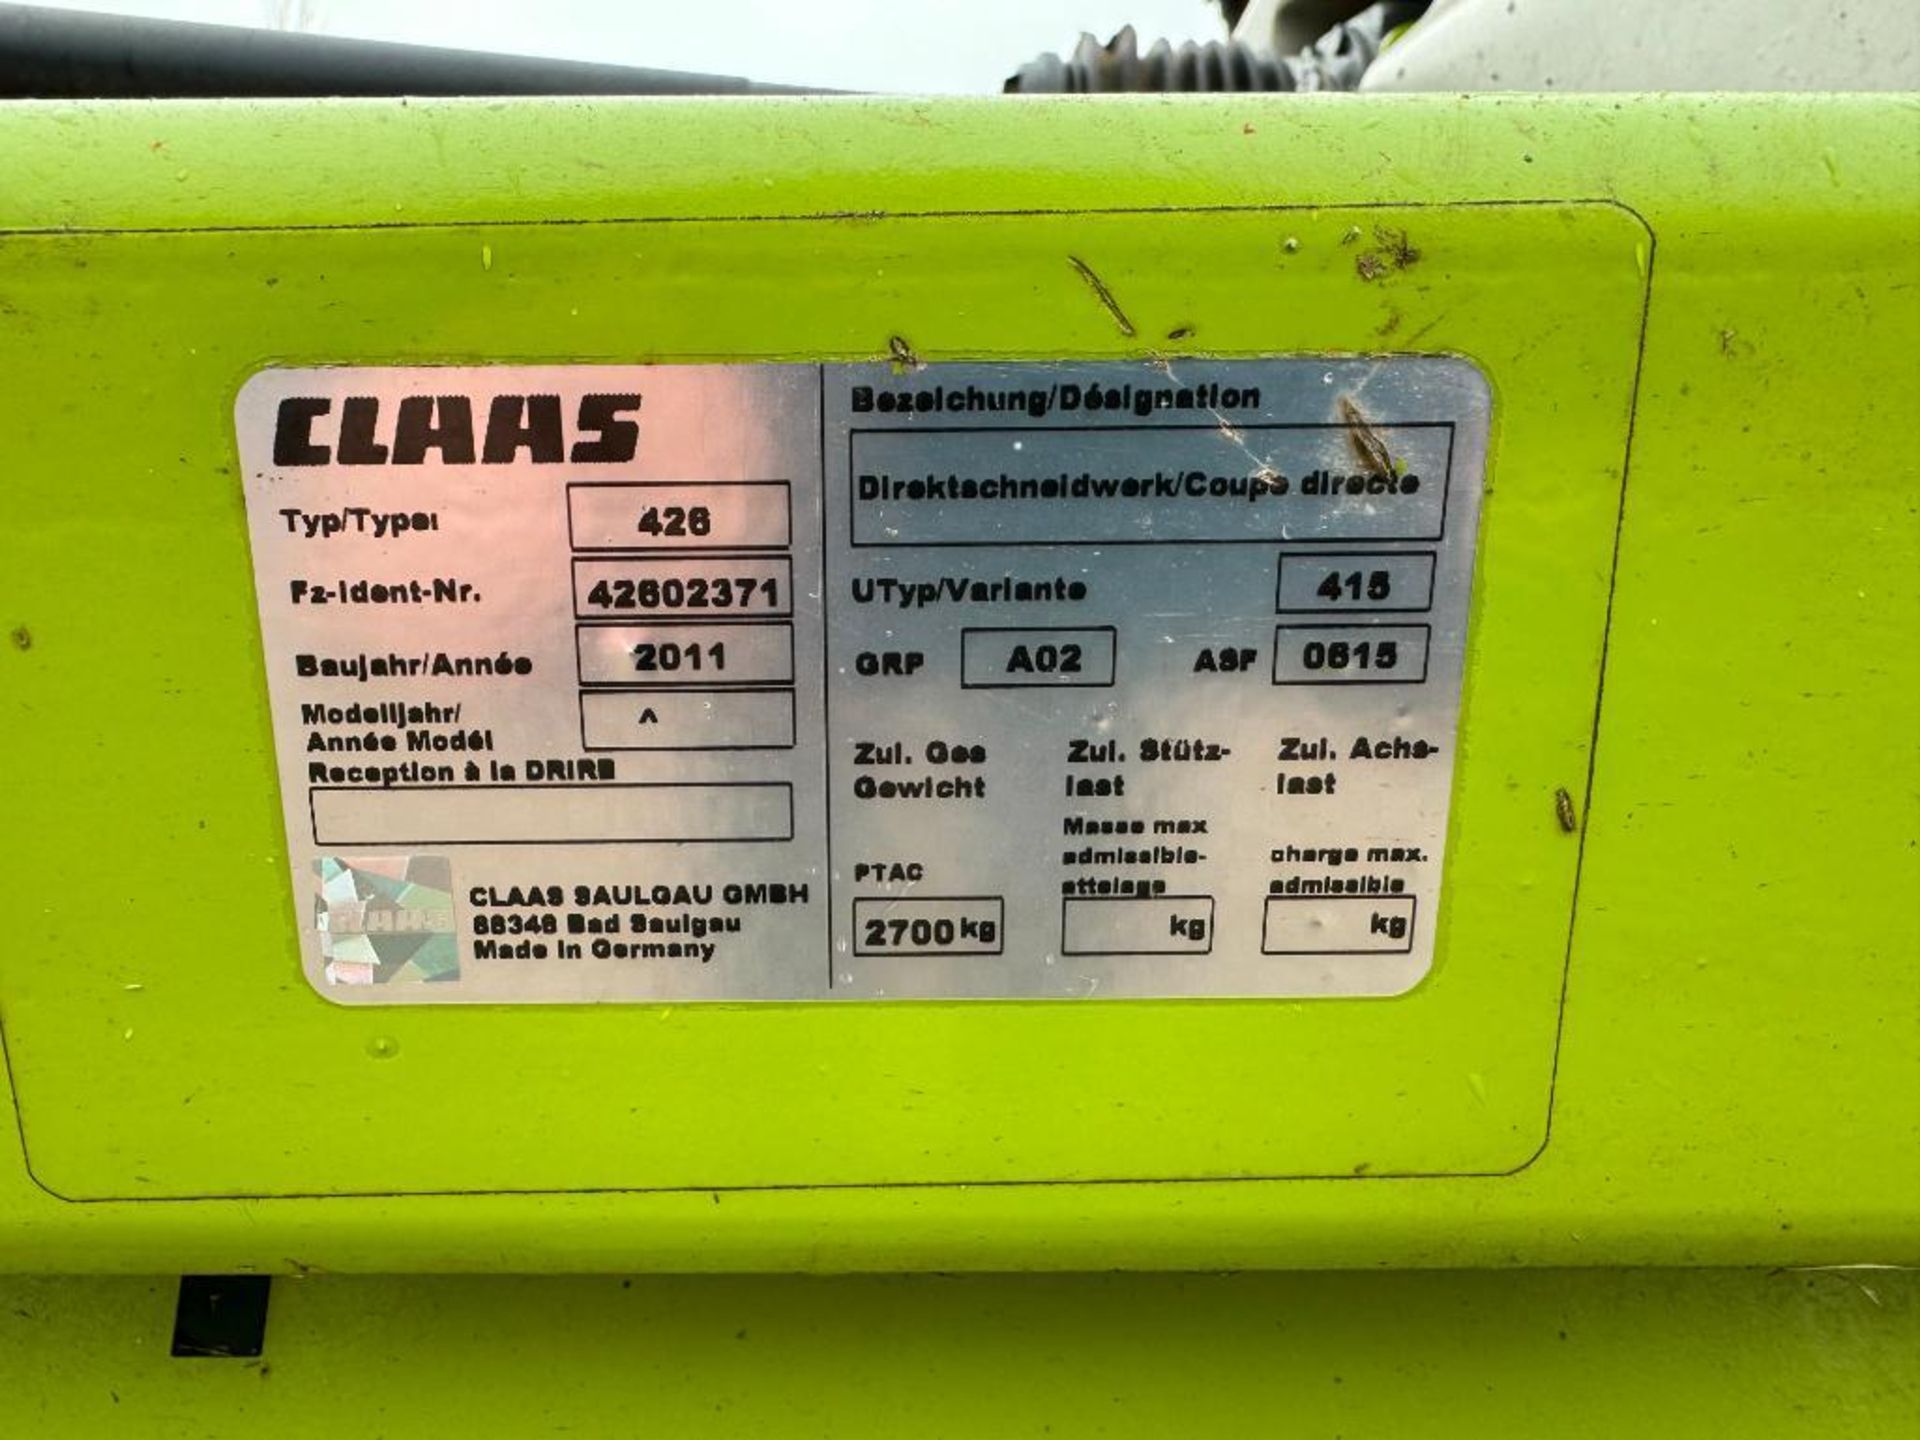 2011 Claas 520 Direct Disc Contour silage header with header trolley. Type: 426. Serial No: 383551 N - Image 6 of 13